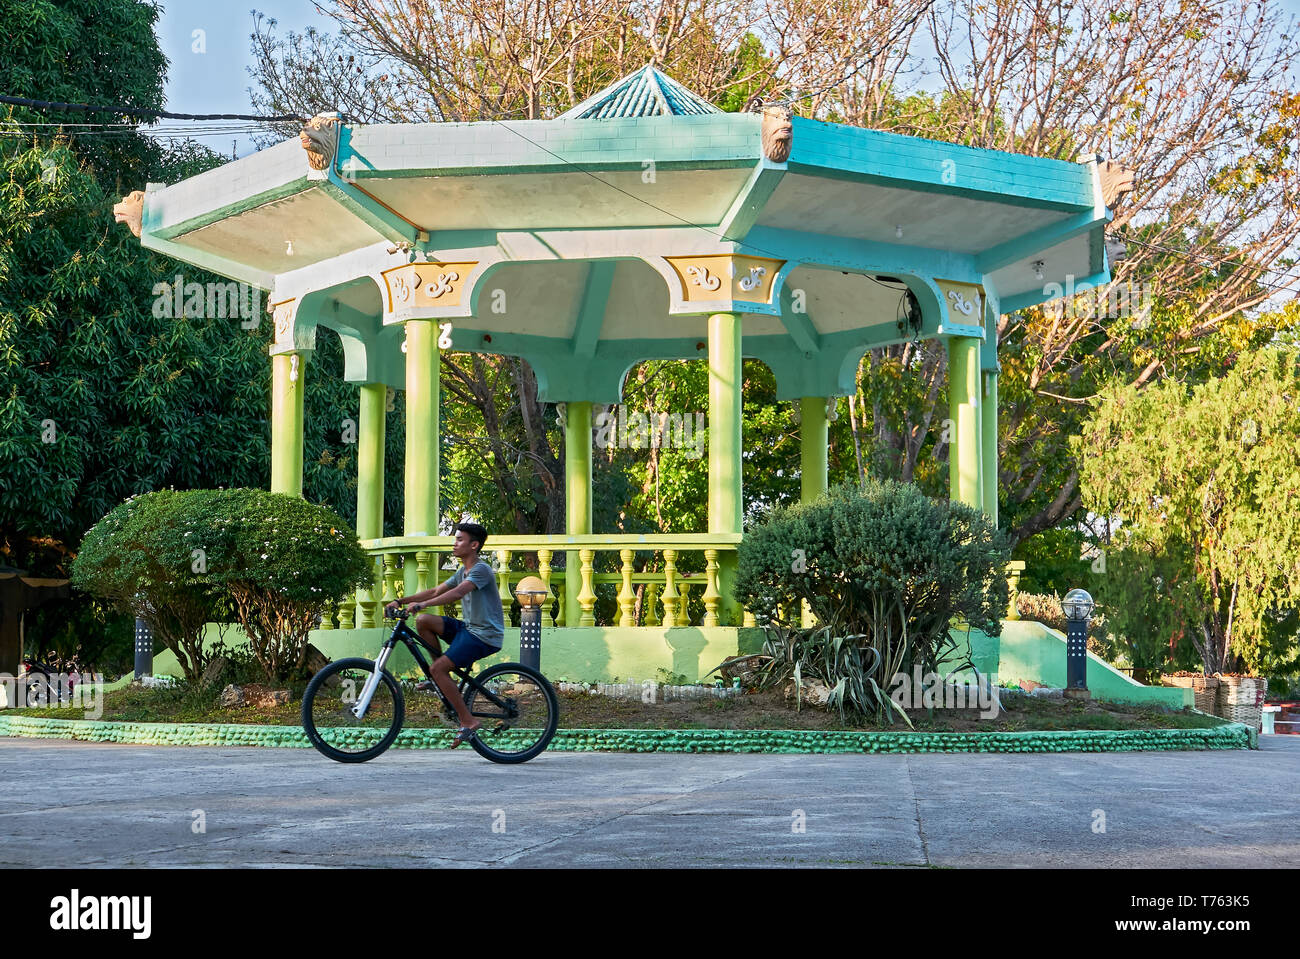 Leon, Iloilo, Philippines: Teenage boy riding a bike in front of a green colored pavilion at the town plaza park in summer time Stock Photo